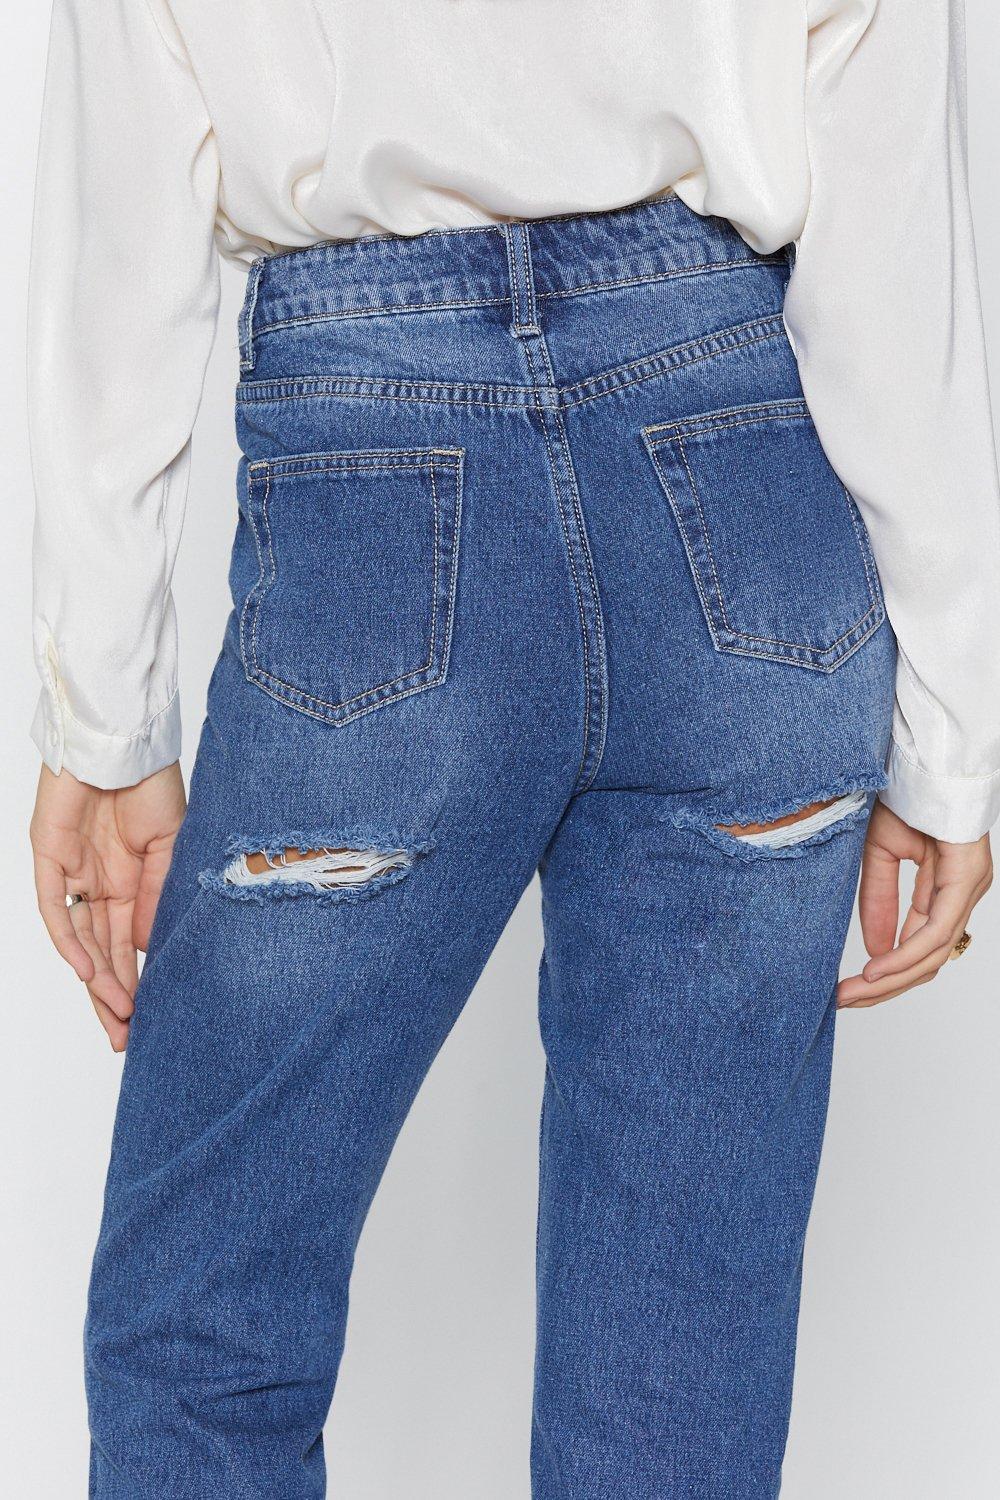 jeans with the rip under bum